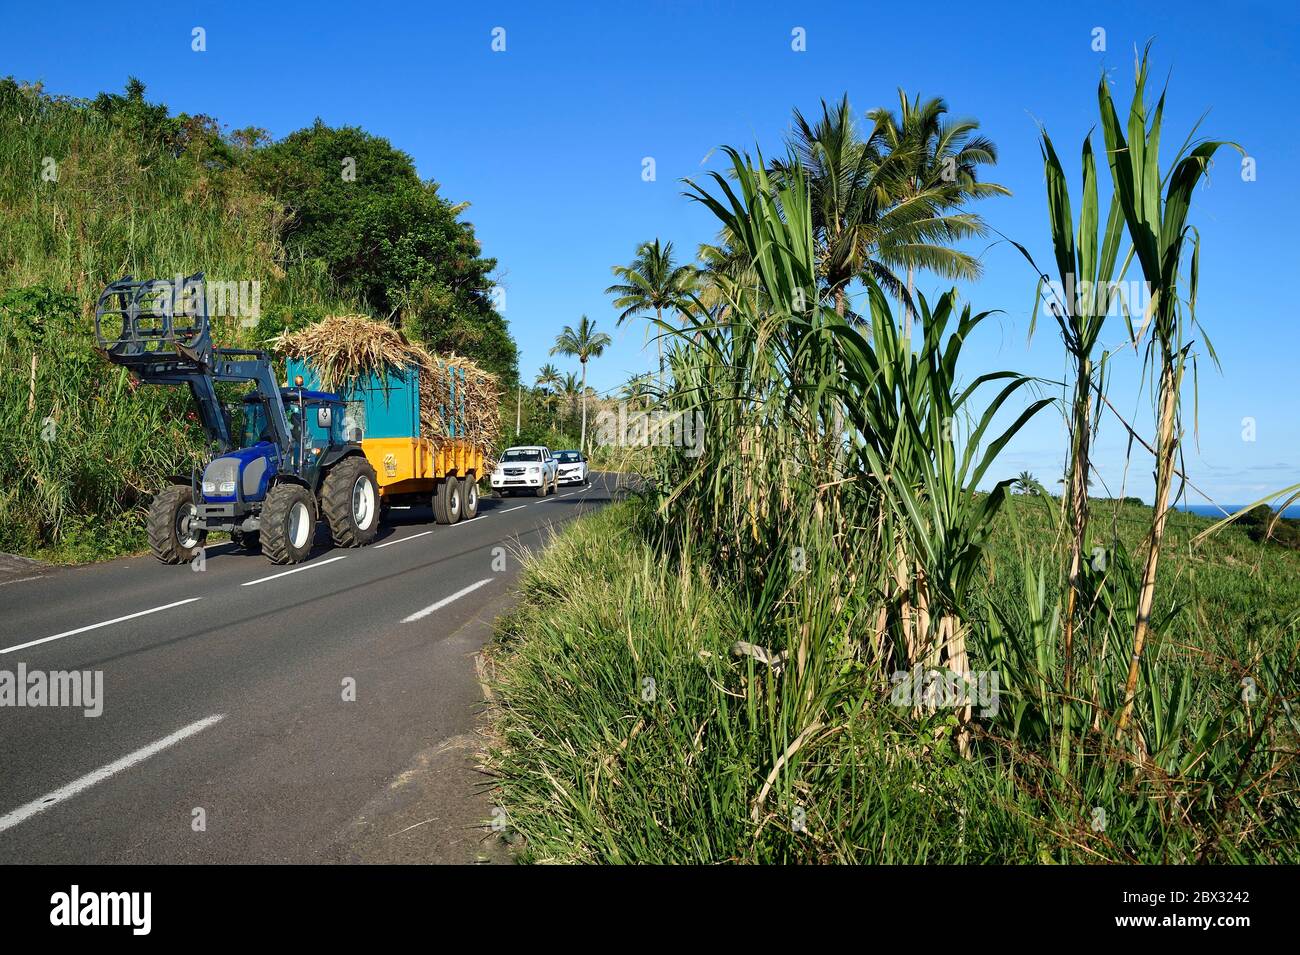 France, Reunion island (French overseas department), Saint-Philippe, tractor carrying a sugarcane trailer Stock Photo